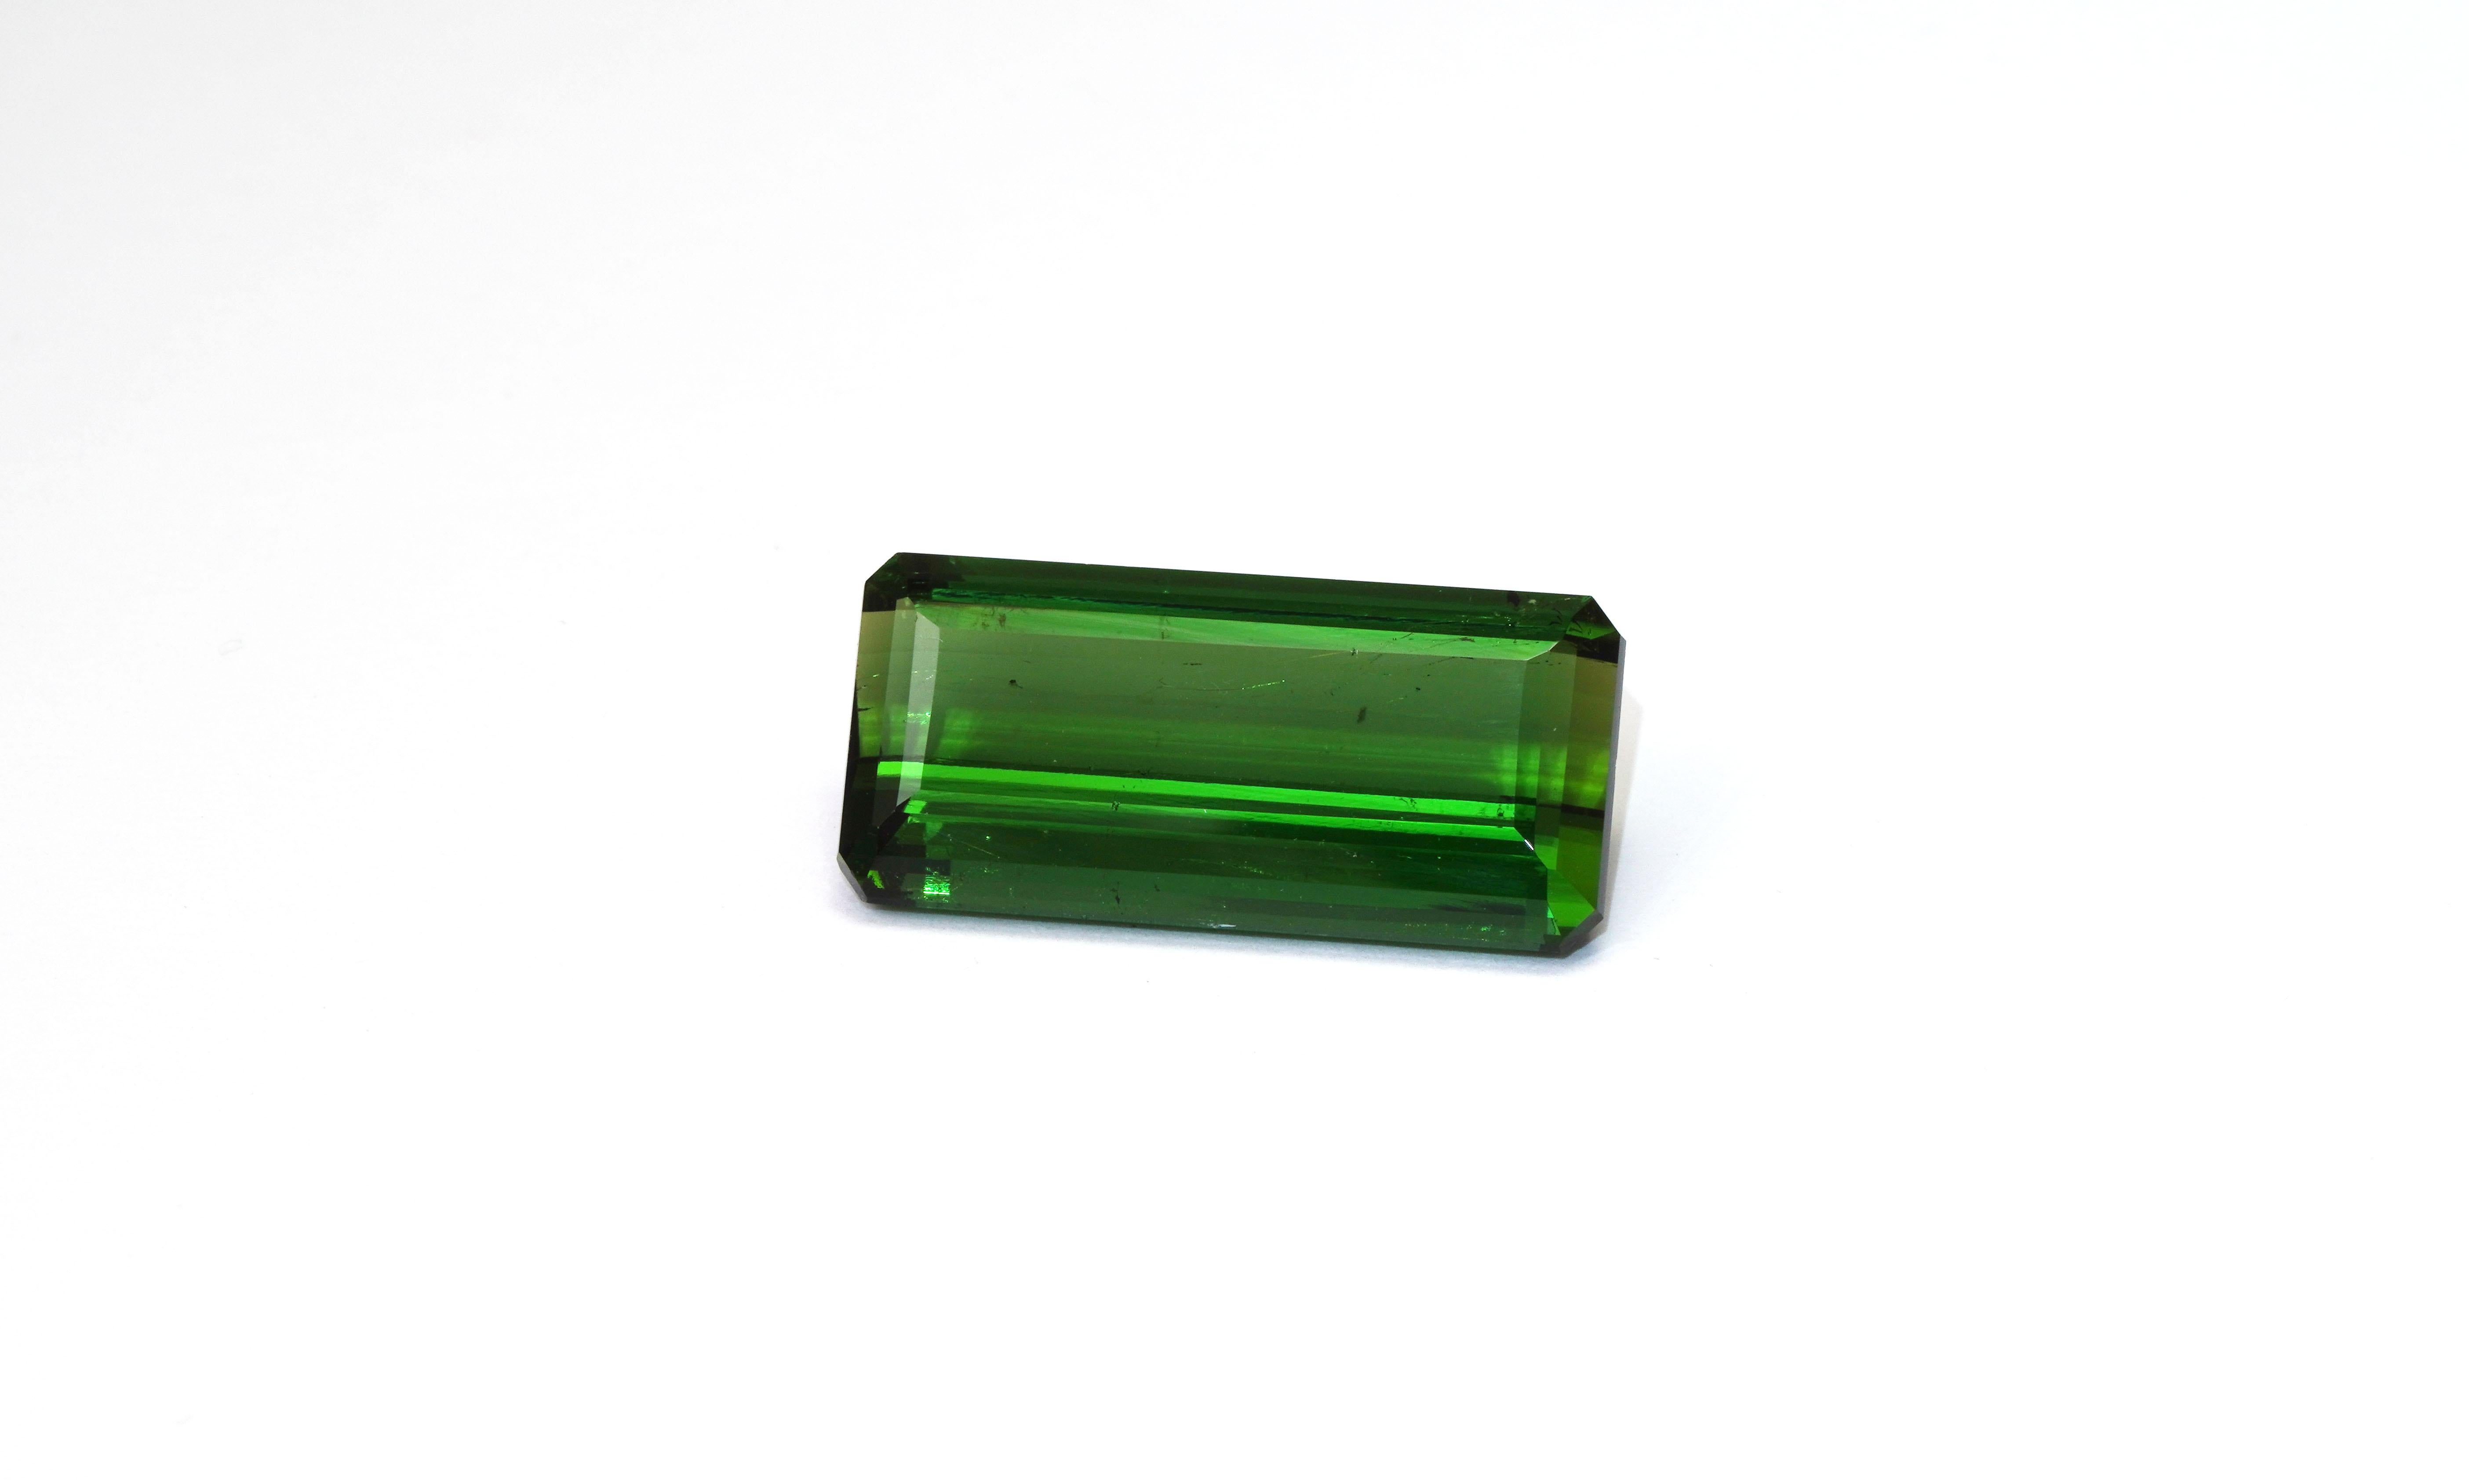 GIA Certified 28.91 Carat Tourmaline
Measurements: 27.52 x 13.14 x 8.40 mm
Weight: 28.91 Carat
Cut: Step Cut
Color: Yellowish Green
No indications of Heating 
Certificate number: 5202536116